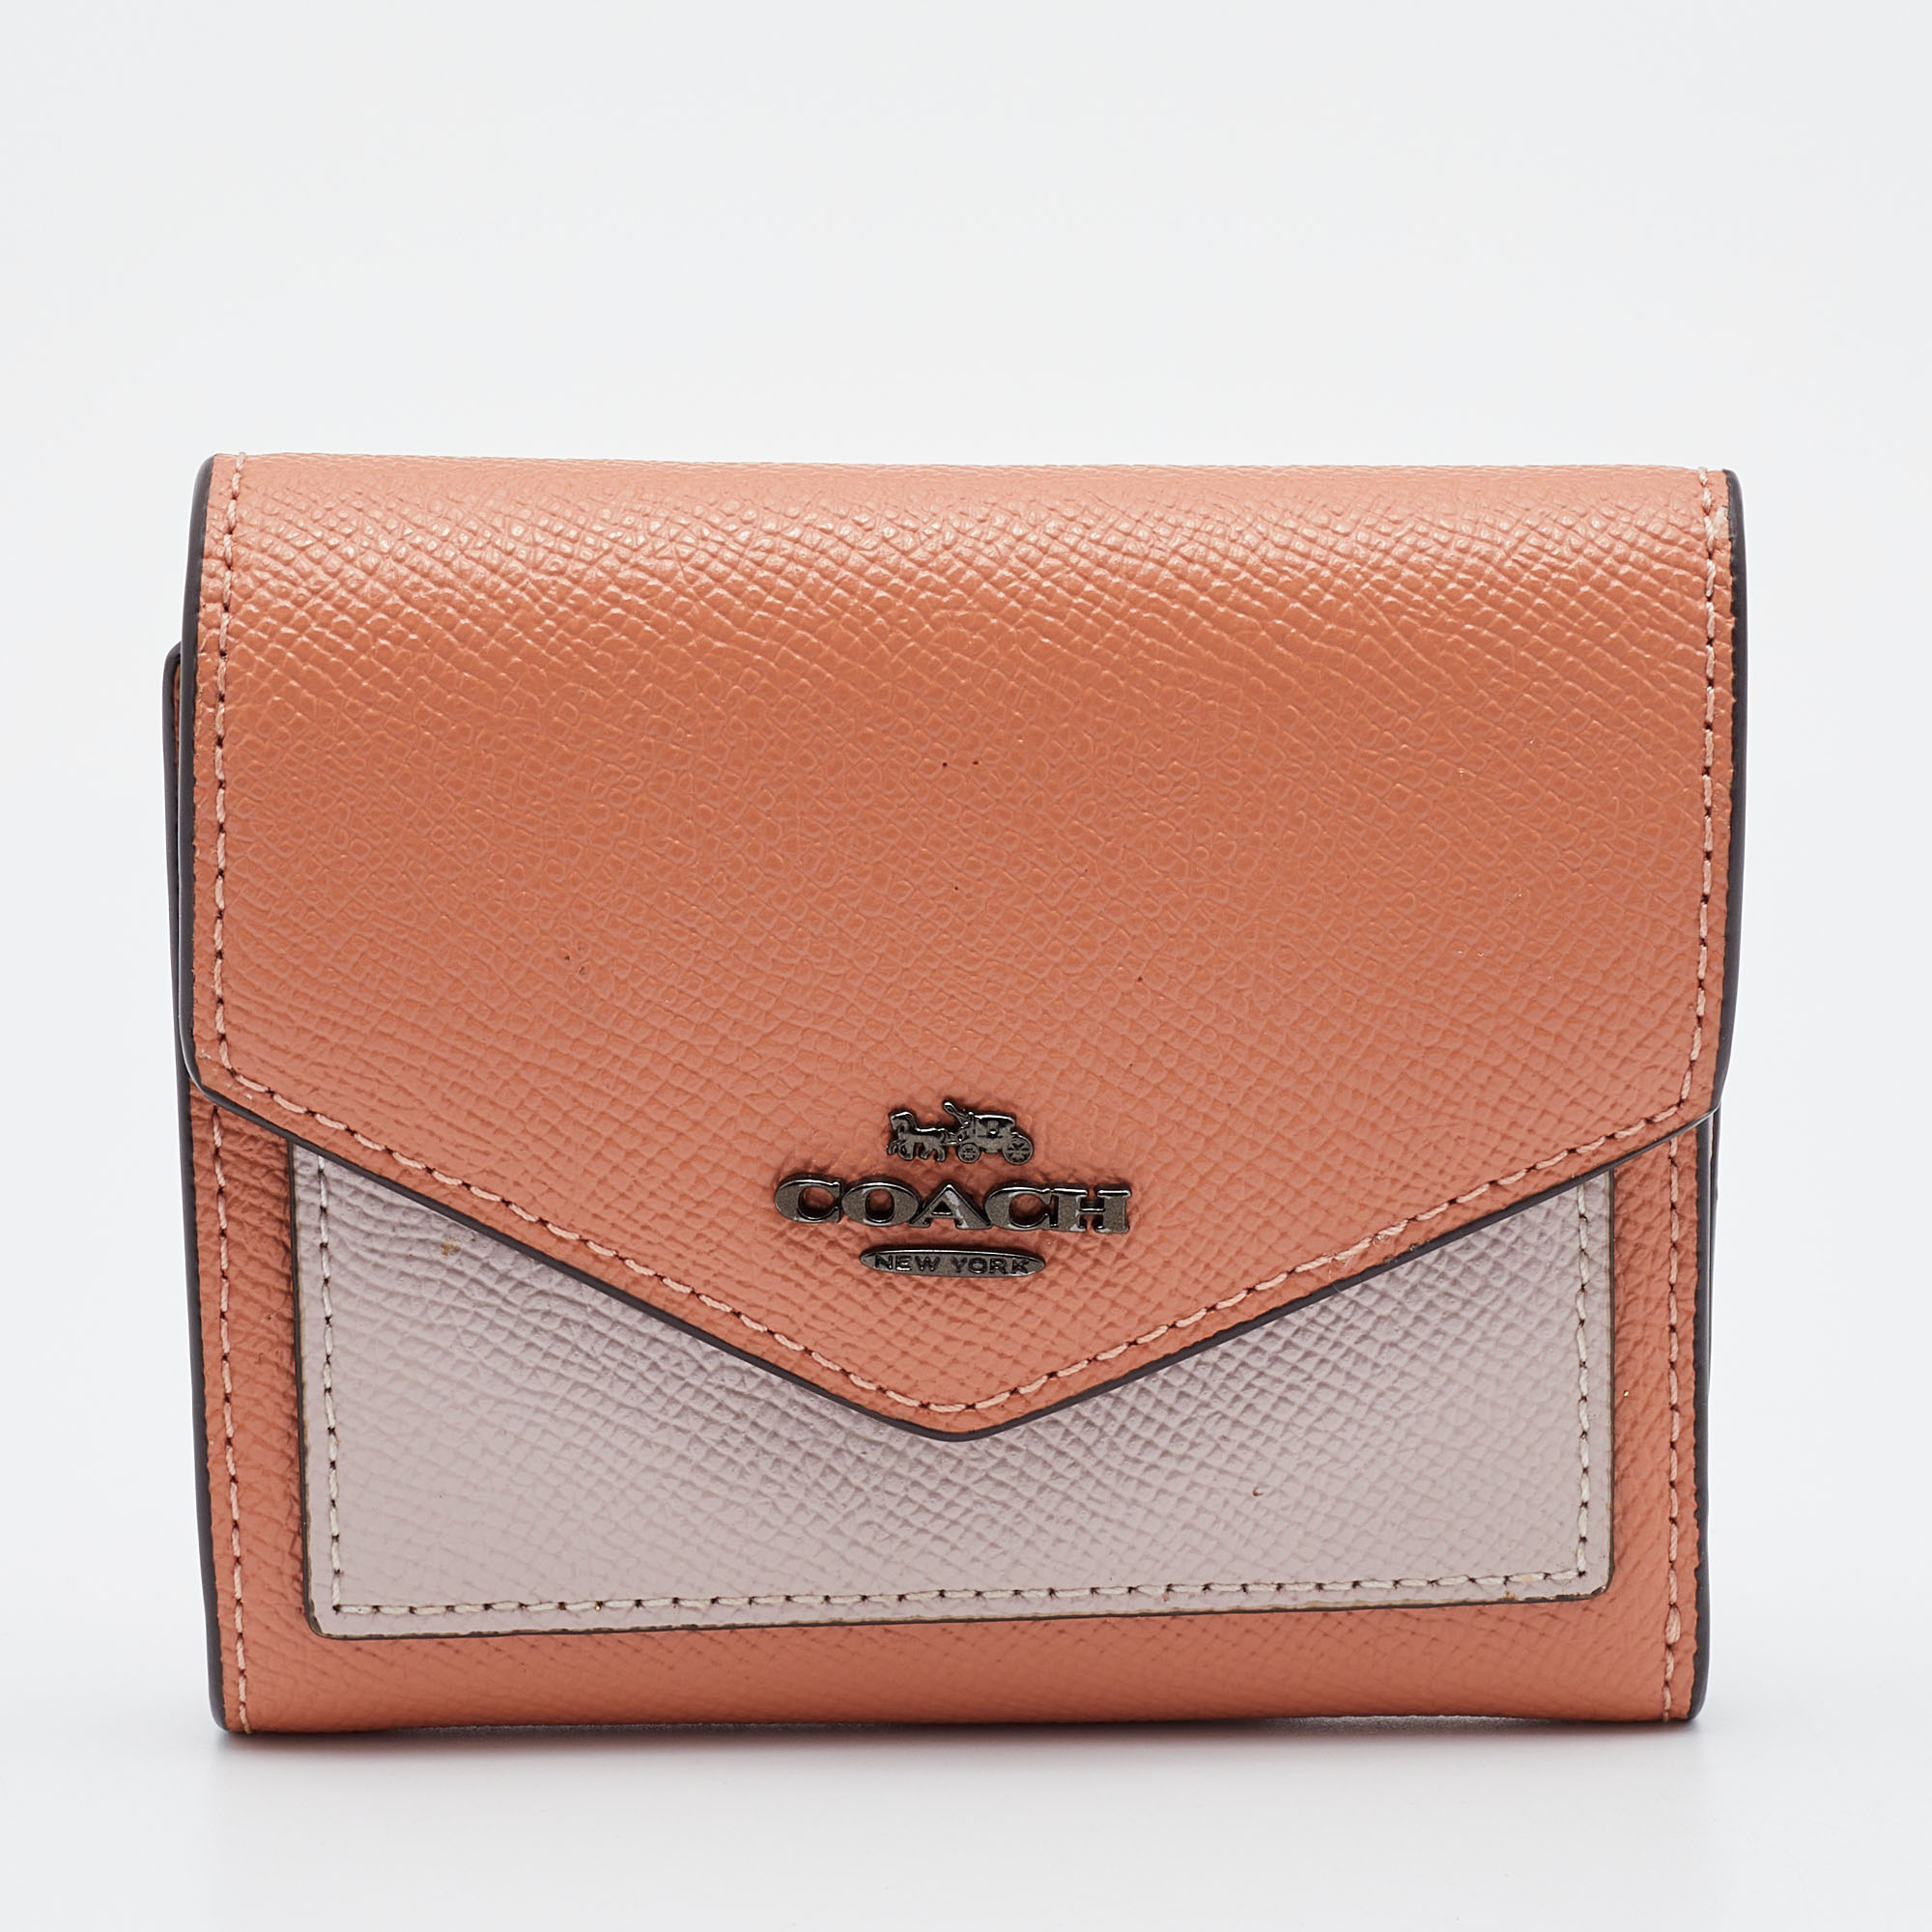 Pre-owned Coach Pastel Orange/pink Leather Colorblock Trifold Wallet